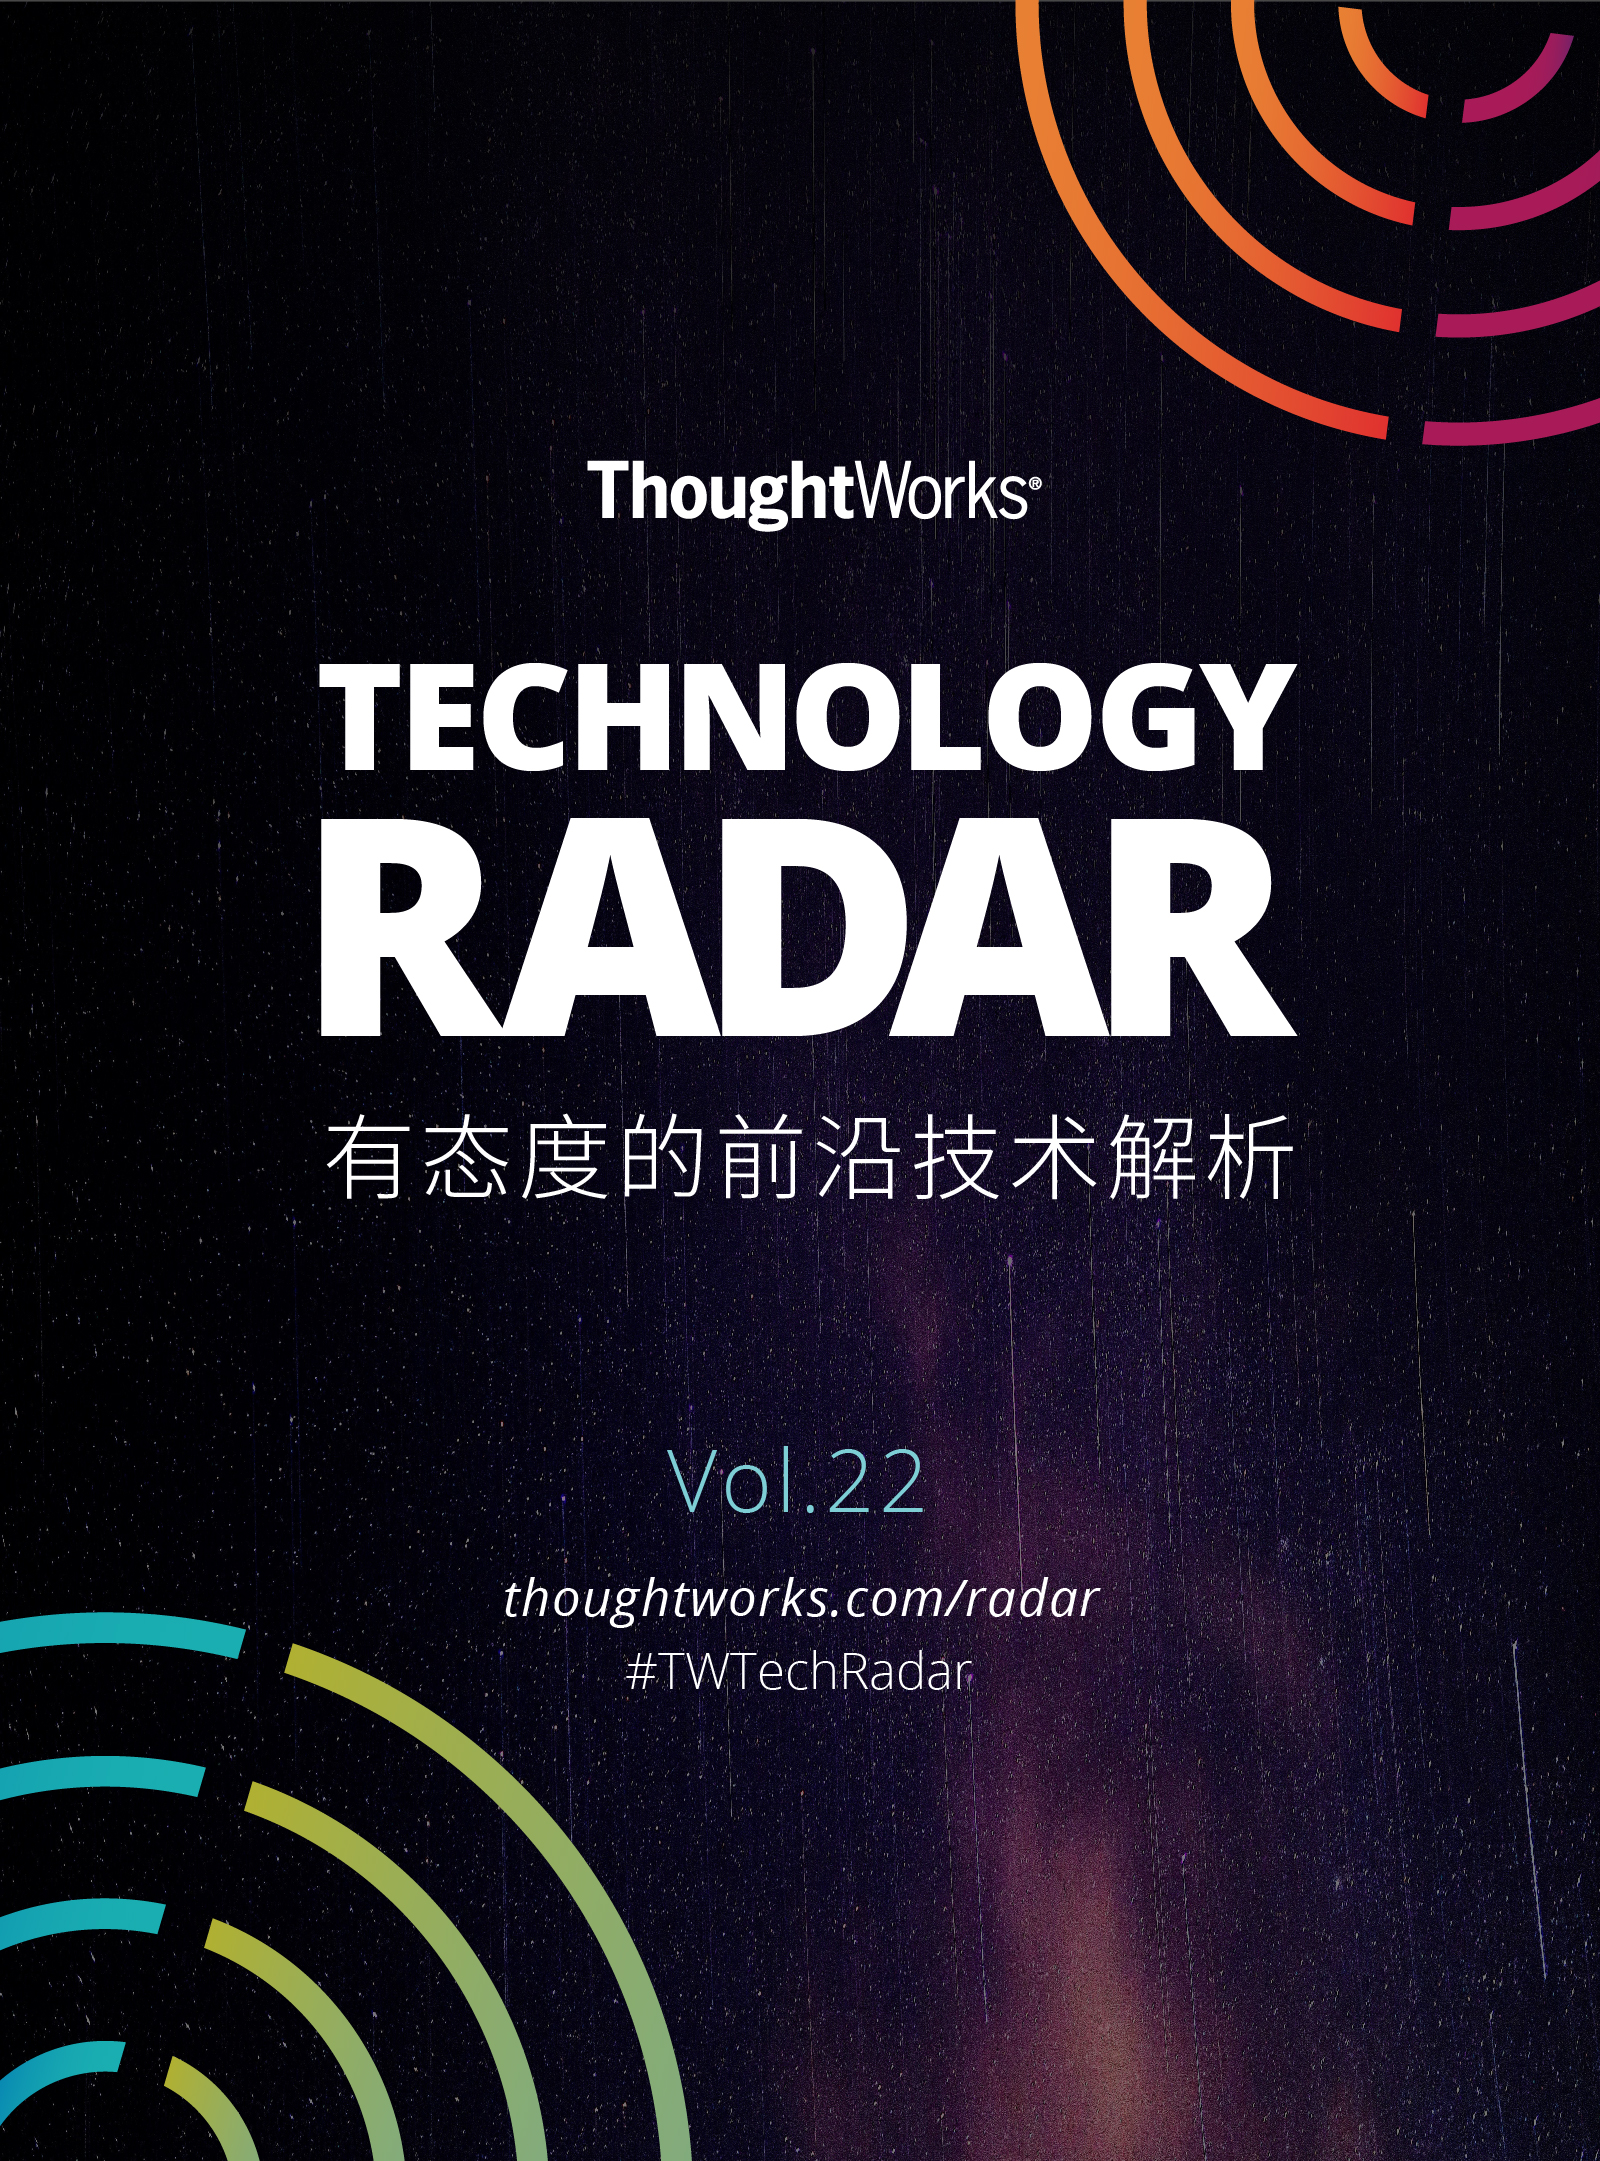 ThoughtWorks技术雷达——有态度的前沿技术解析（ThoughtWorks洞见）